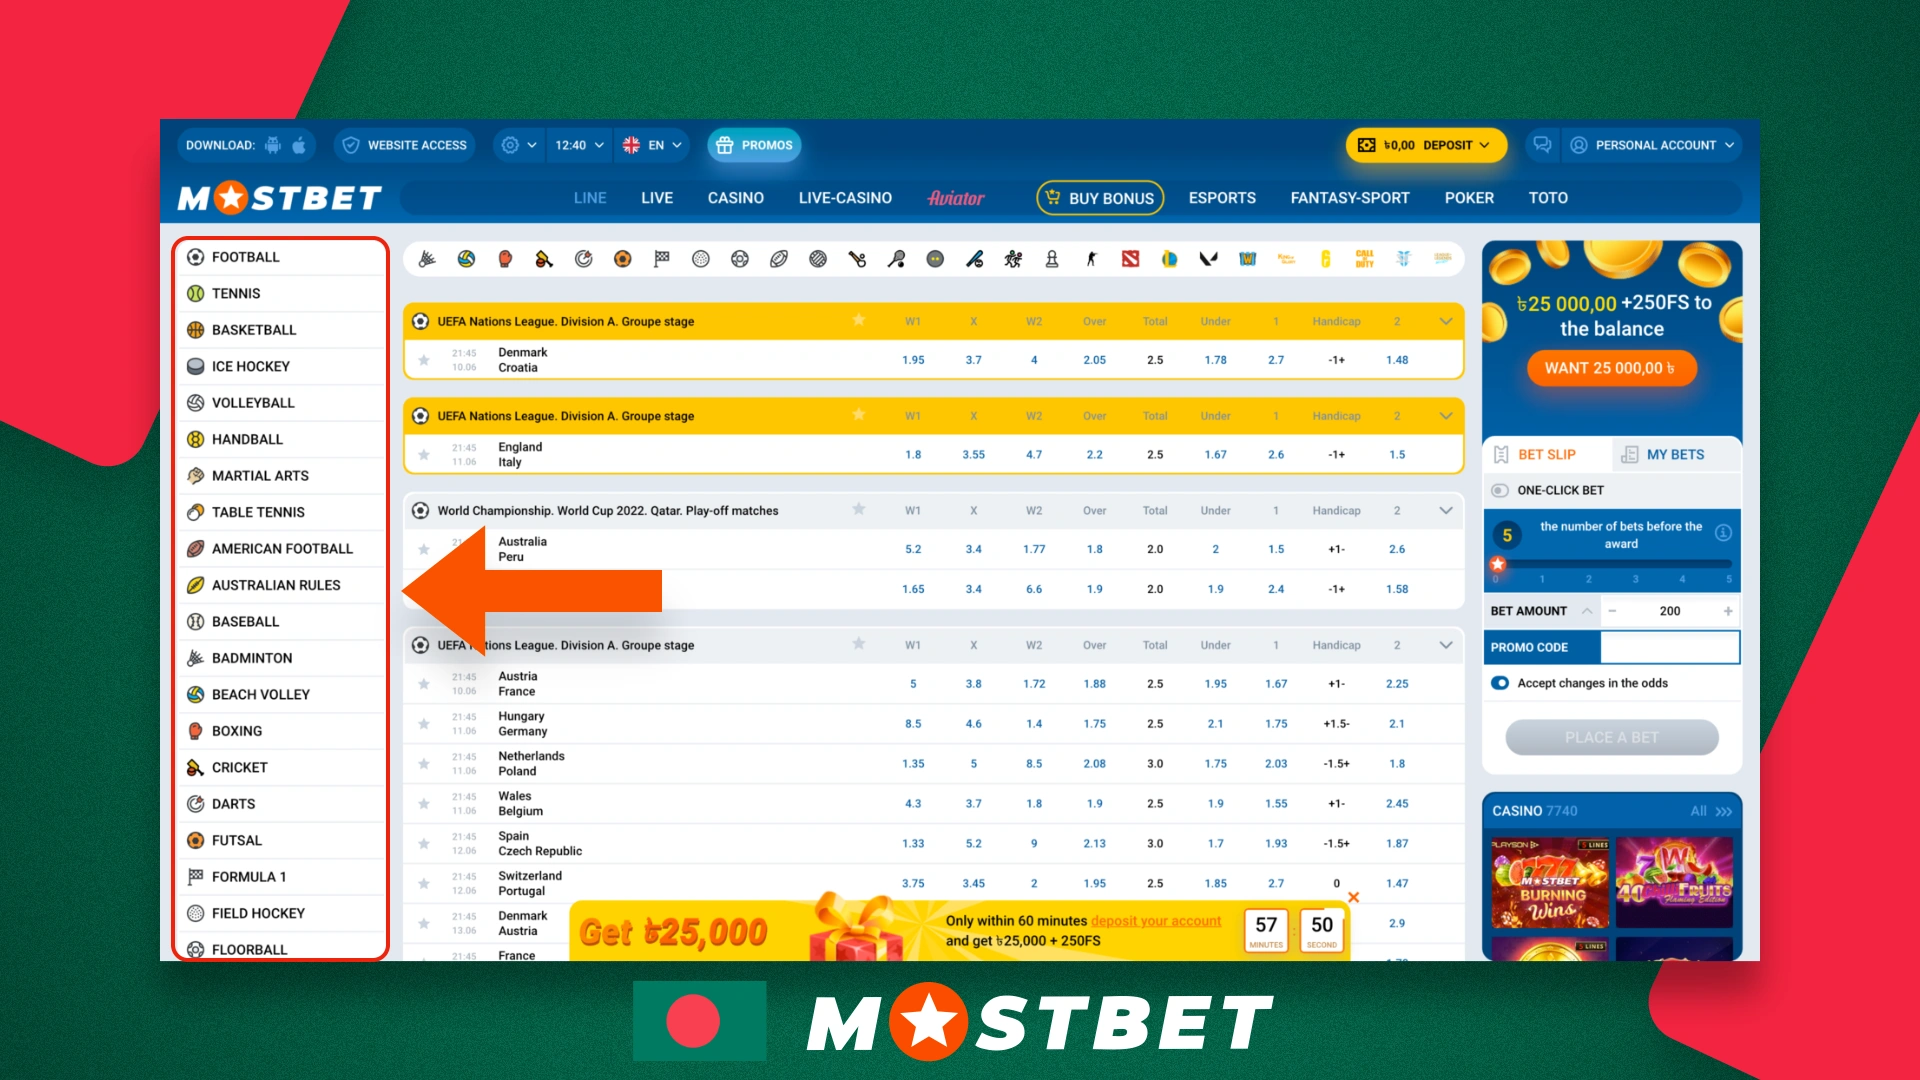 List of sports, on which you can bet with Mostbet